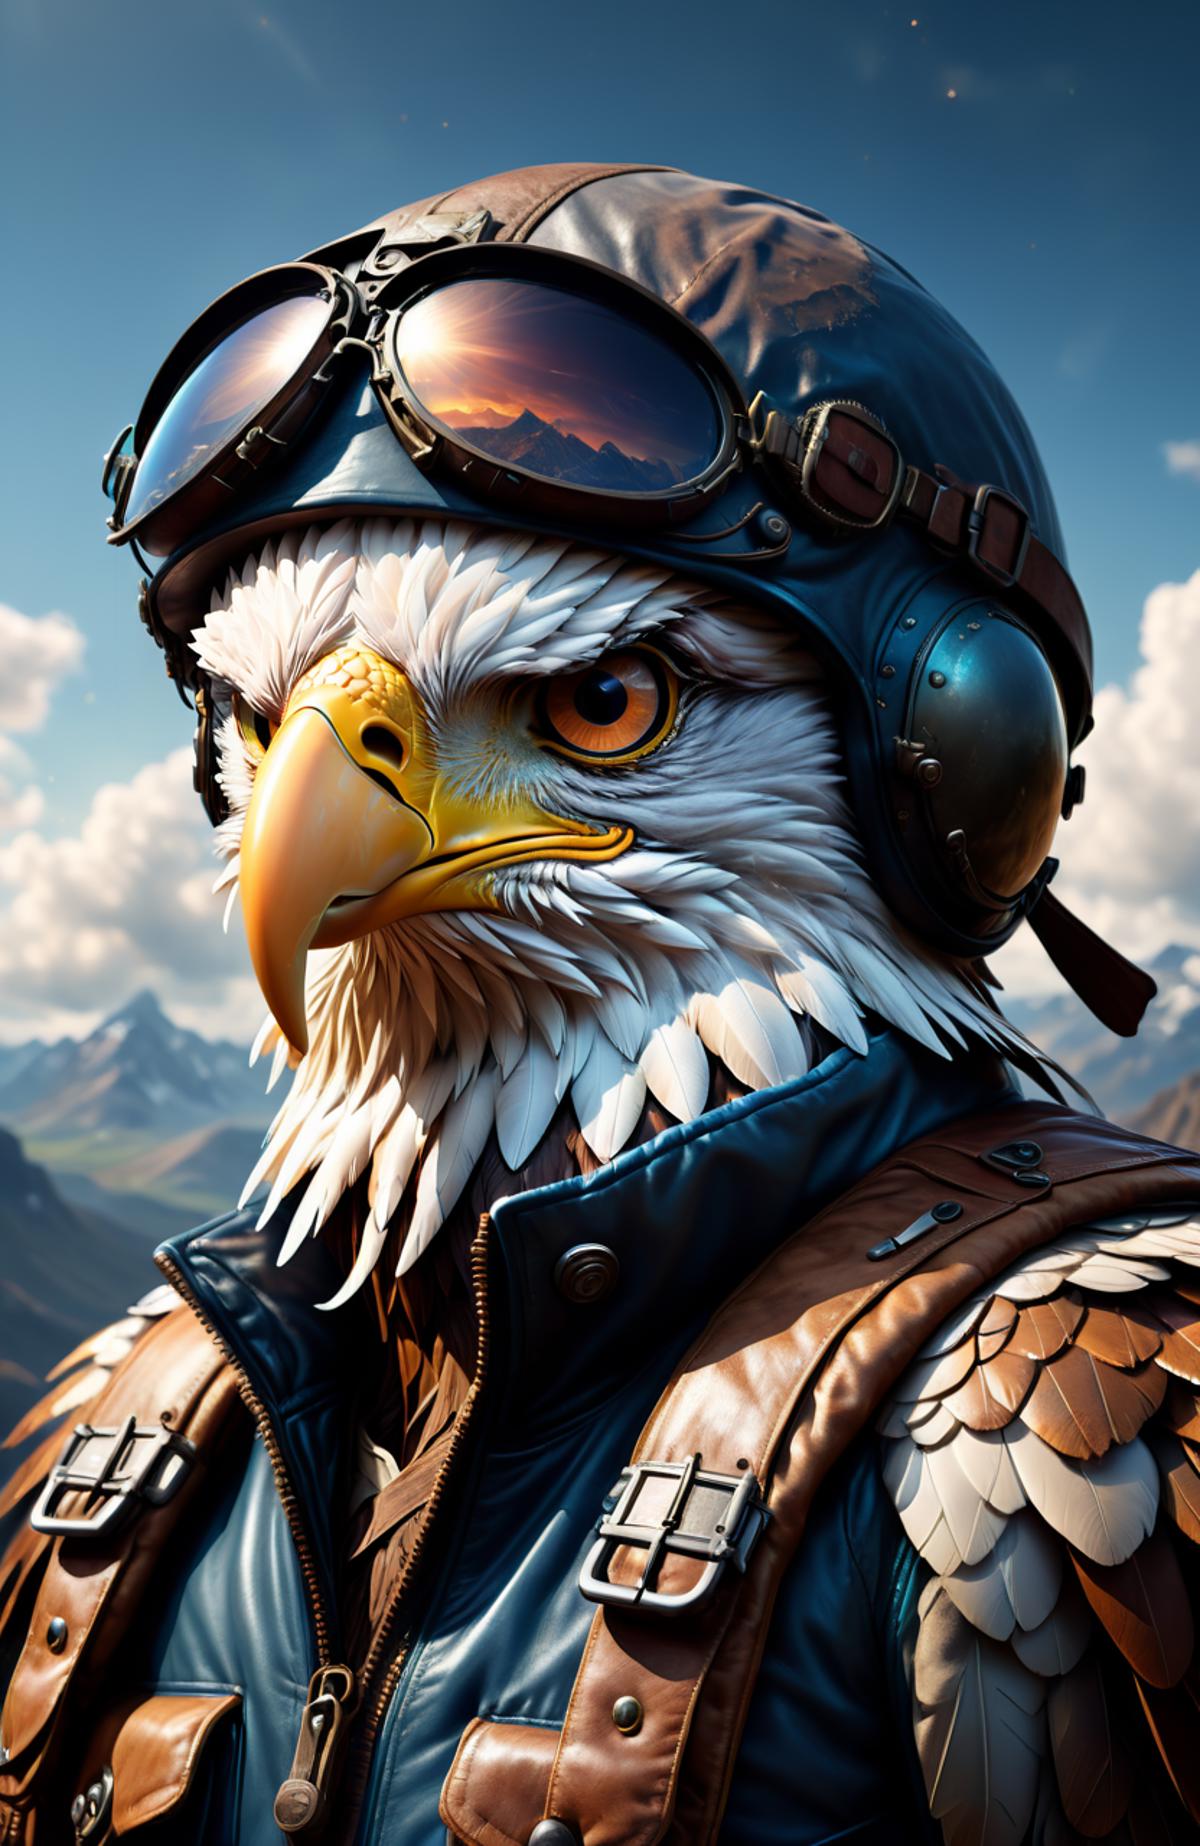 A digital illustration of an eagle in a pilot's suit and goggles.